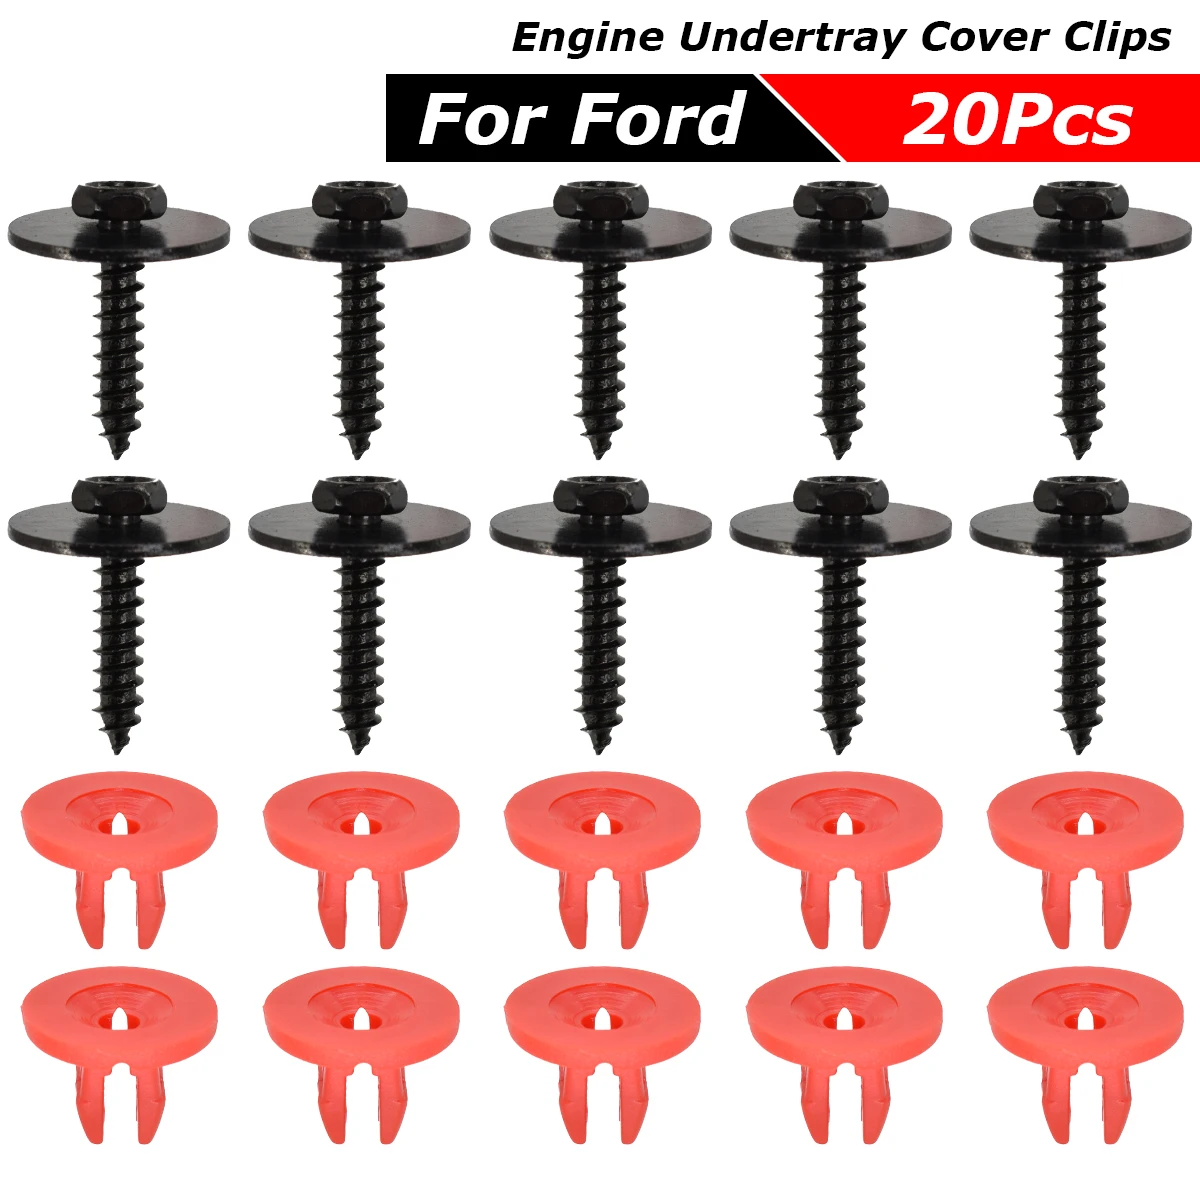 20pcs Car Engine Undertray Cover Clips Screws Bottom Cover Shield Guard for Ford - £13.33 GBP